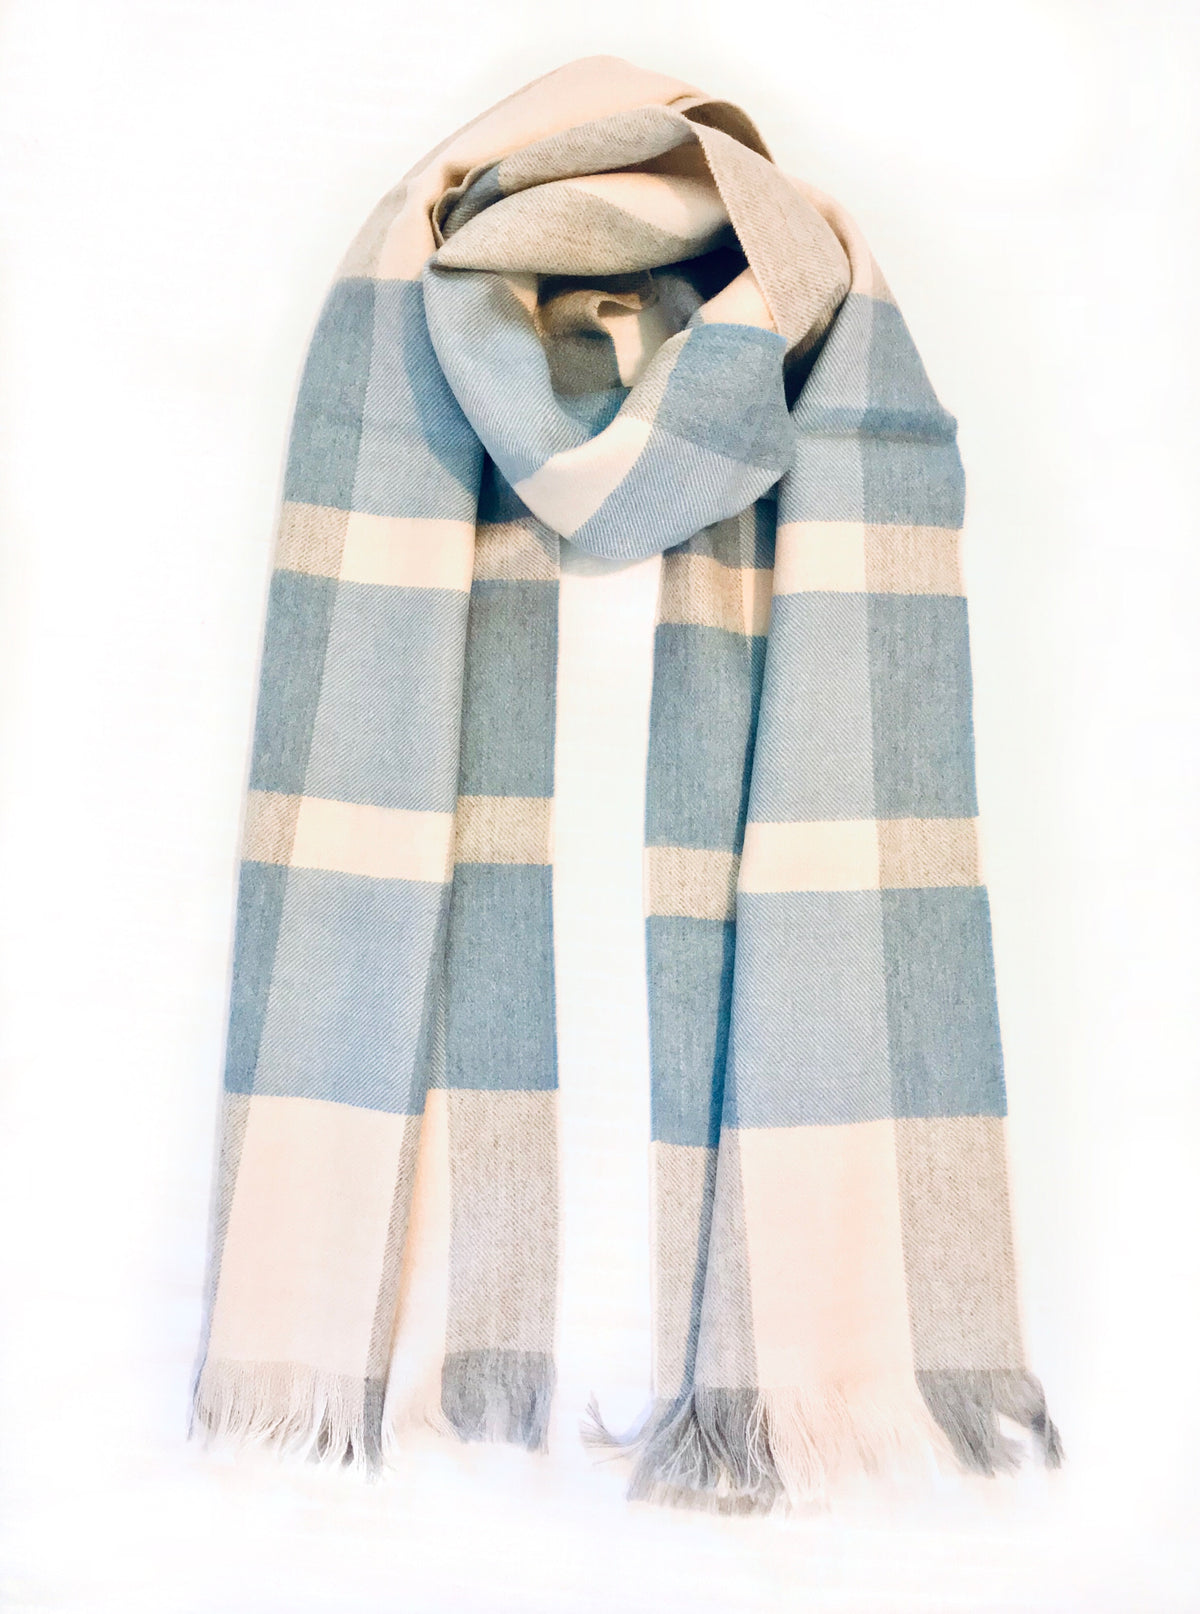 A product photo in front of a white background of a beautiful soft cozy luxury stylish fashion comfortable accessory sky blue, light gray, and natural white alpaca wool scarf with tassels.